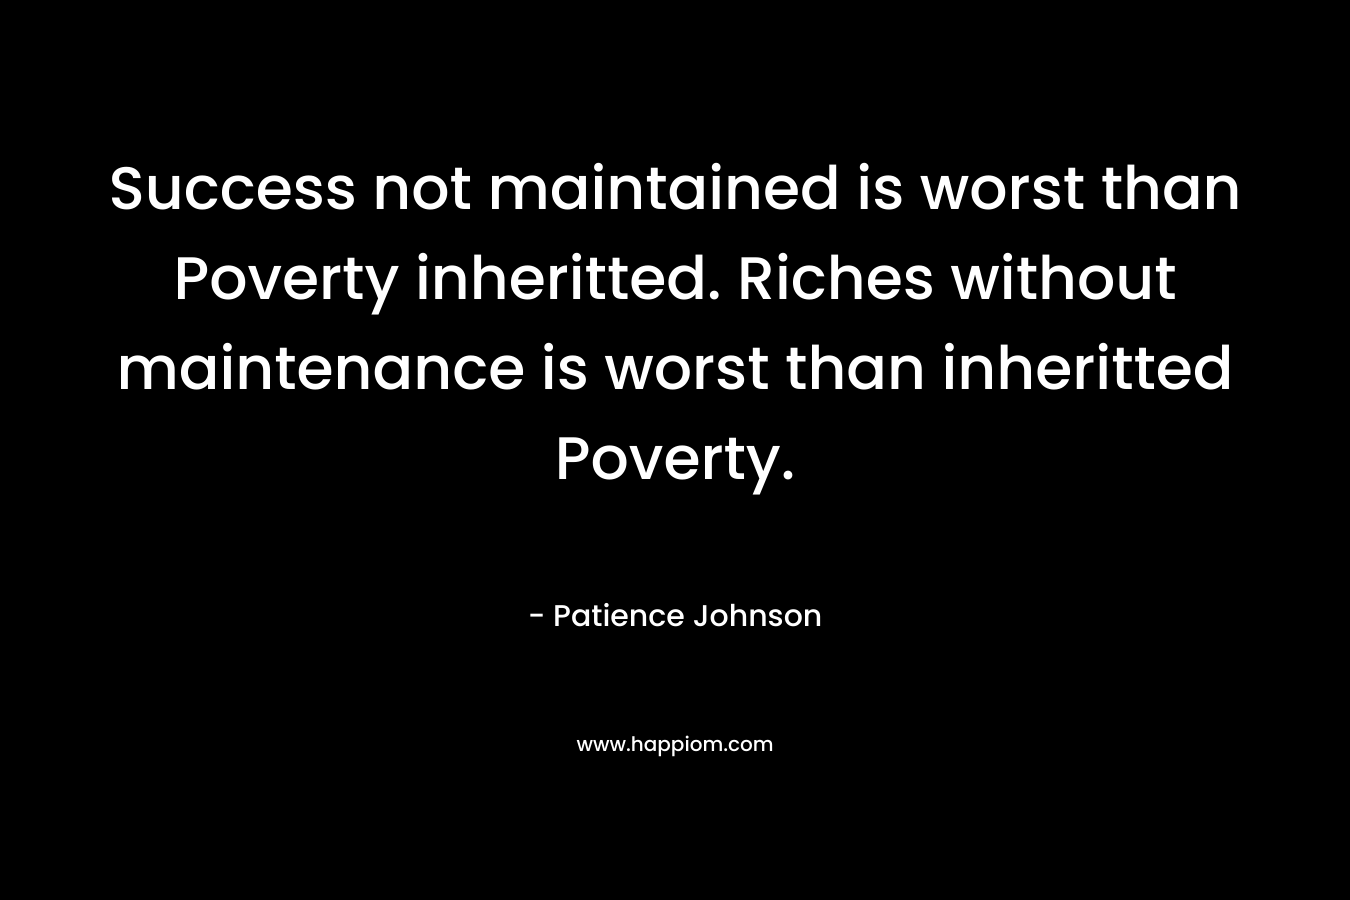 Success not maintained is worst than Poverty inheritted. Riches without maintenance is worst than inheritted Poverty. – Patience Johnson